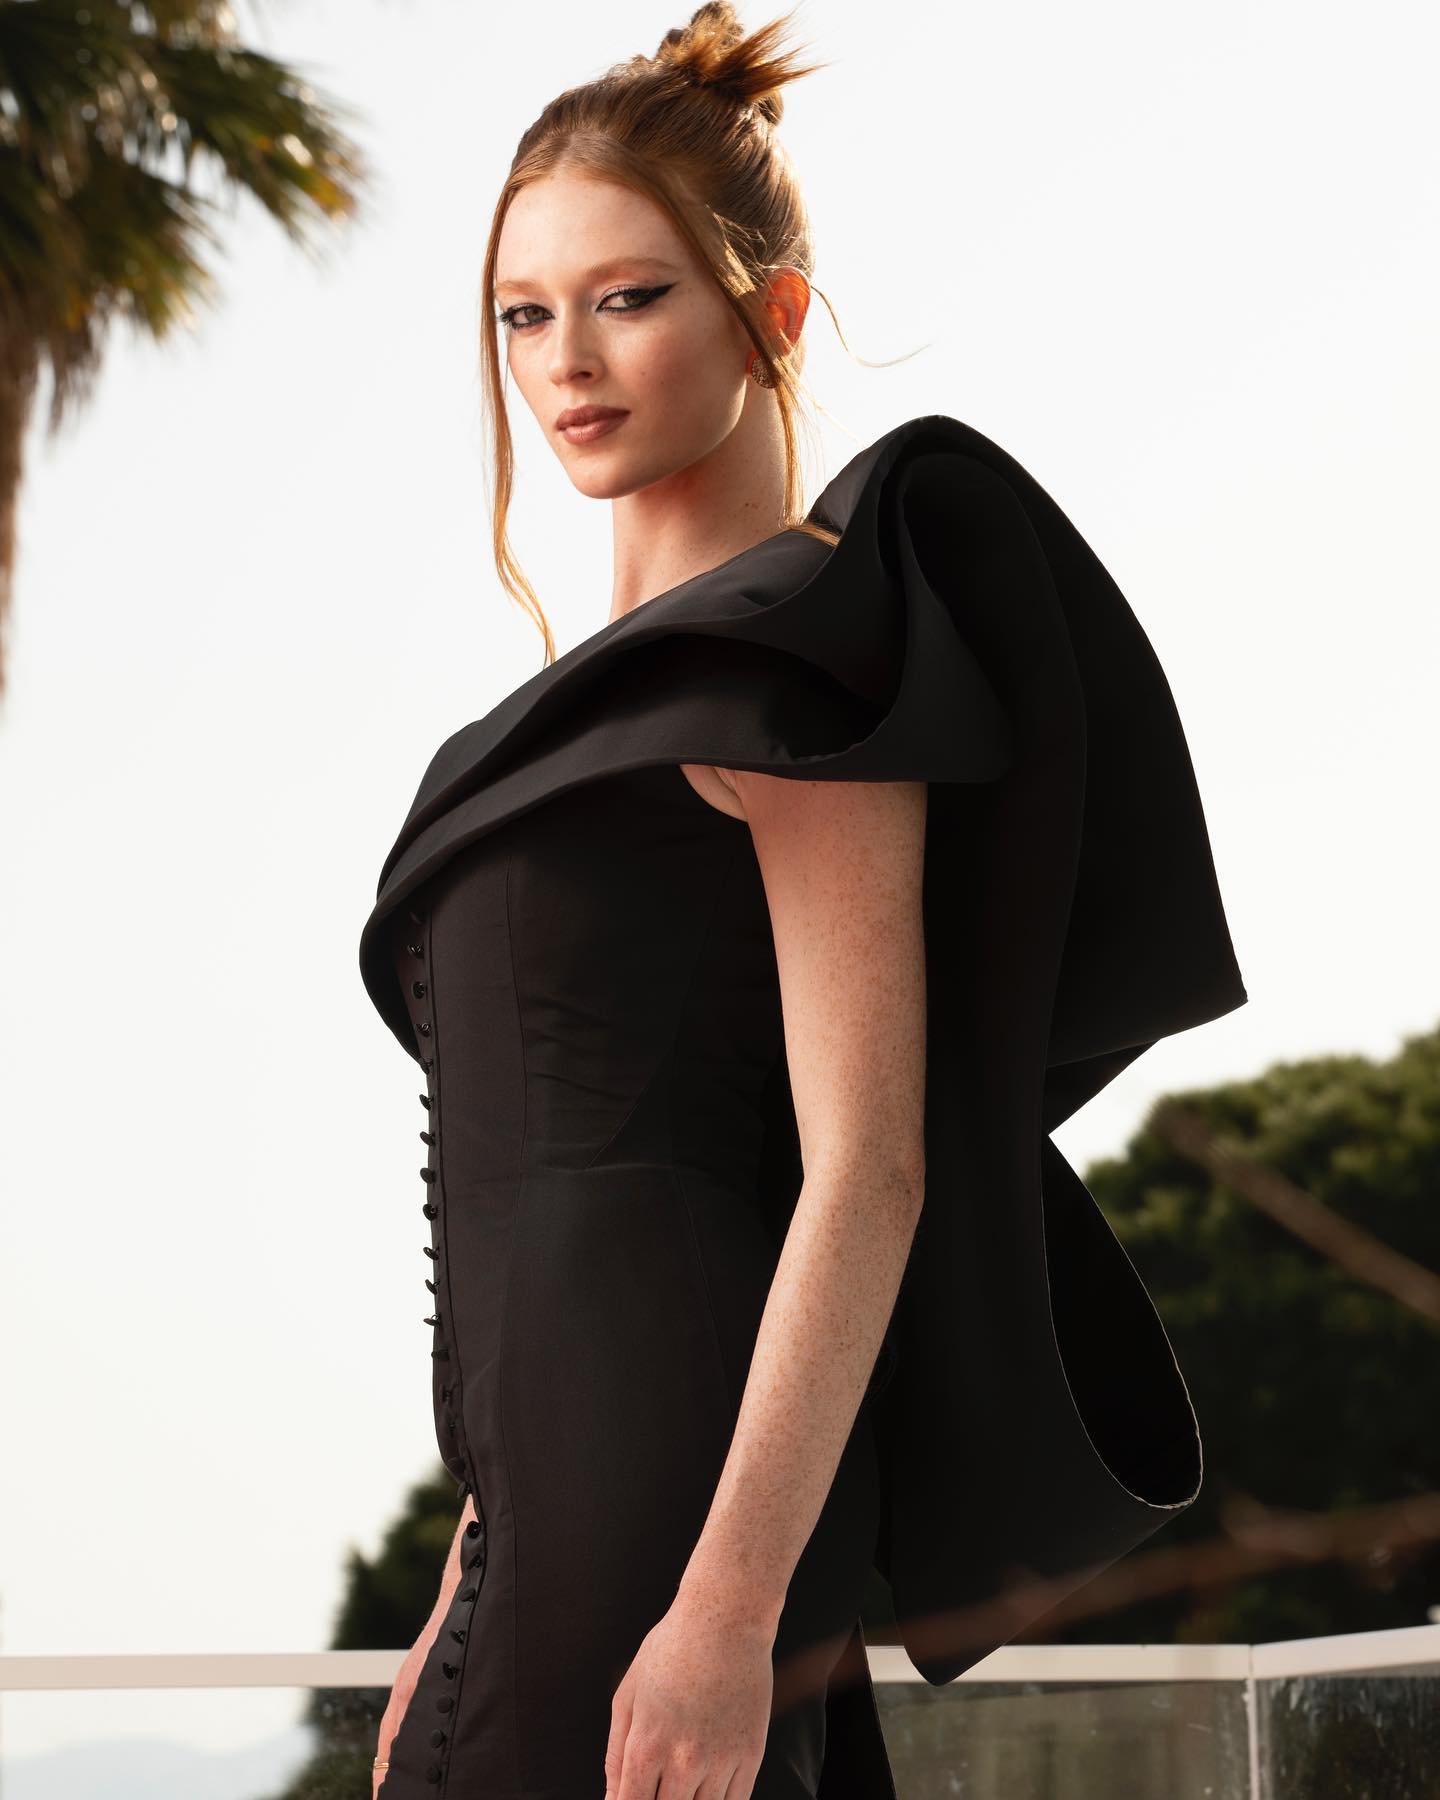 Larsen Thompson Photoshoot in Black Gown at 2022 Cannes Film Festival, May 2022